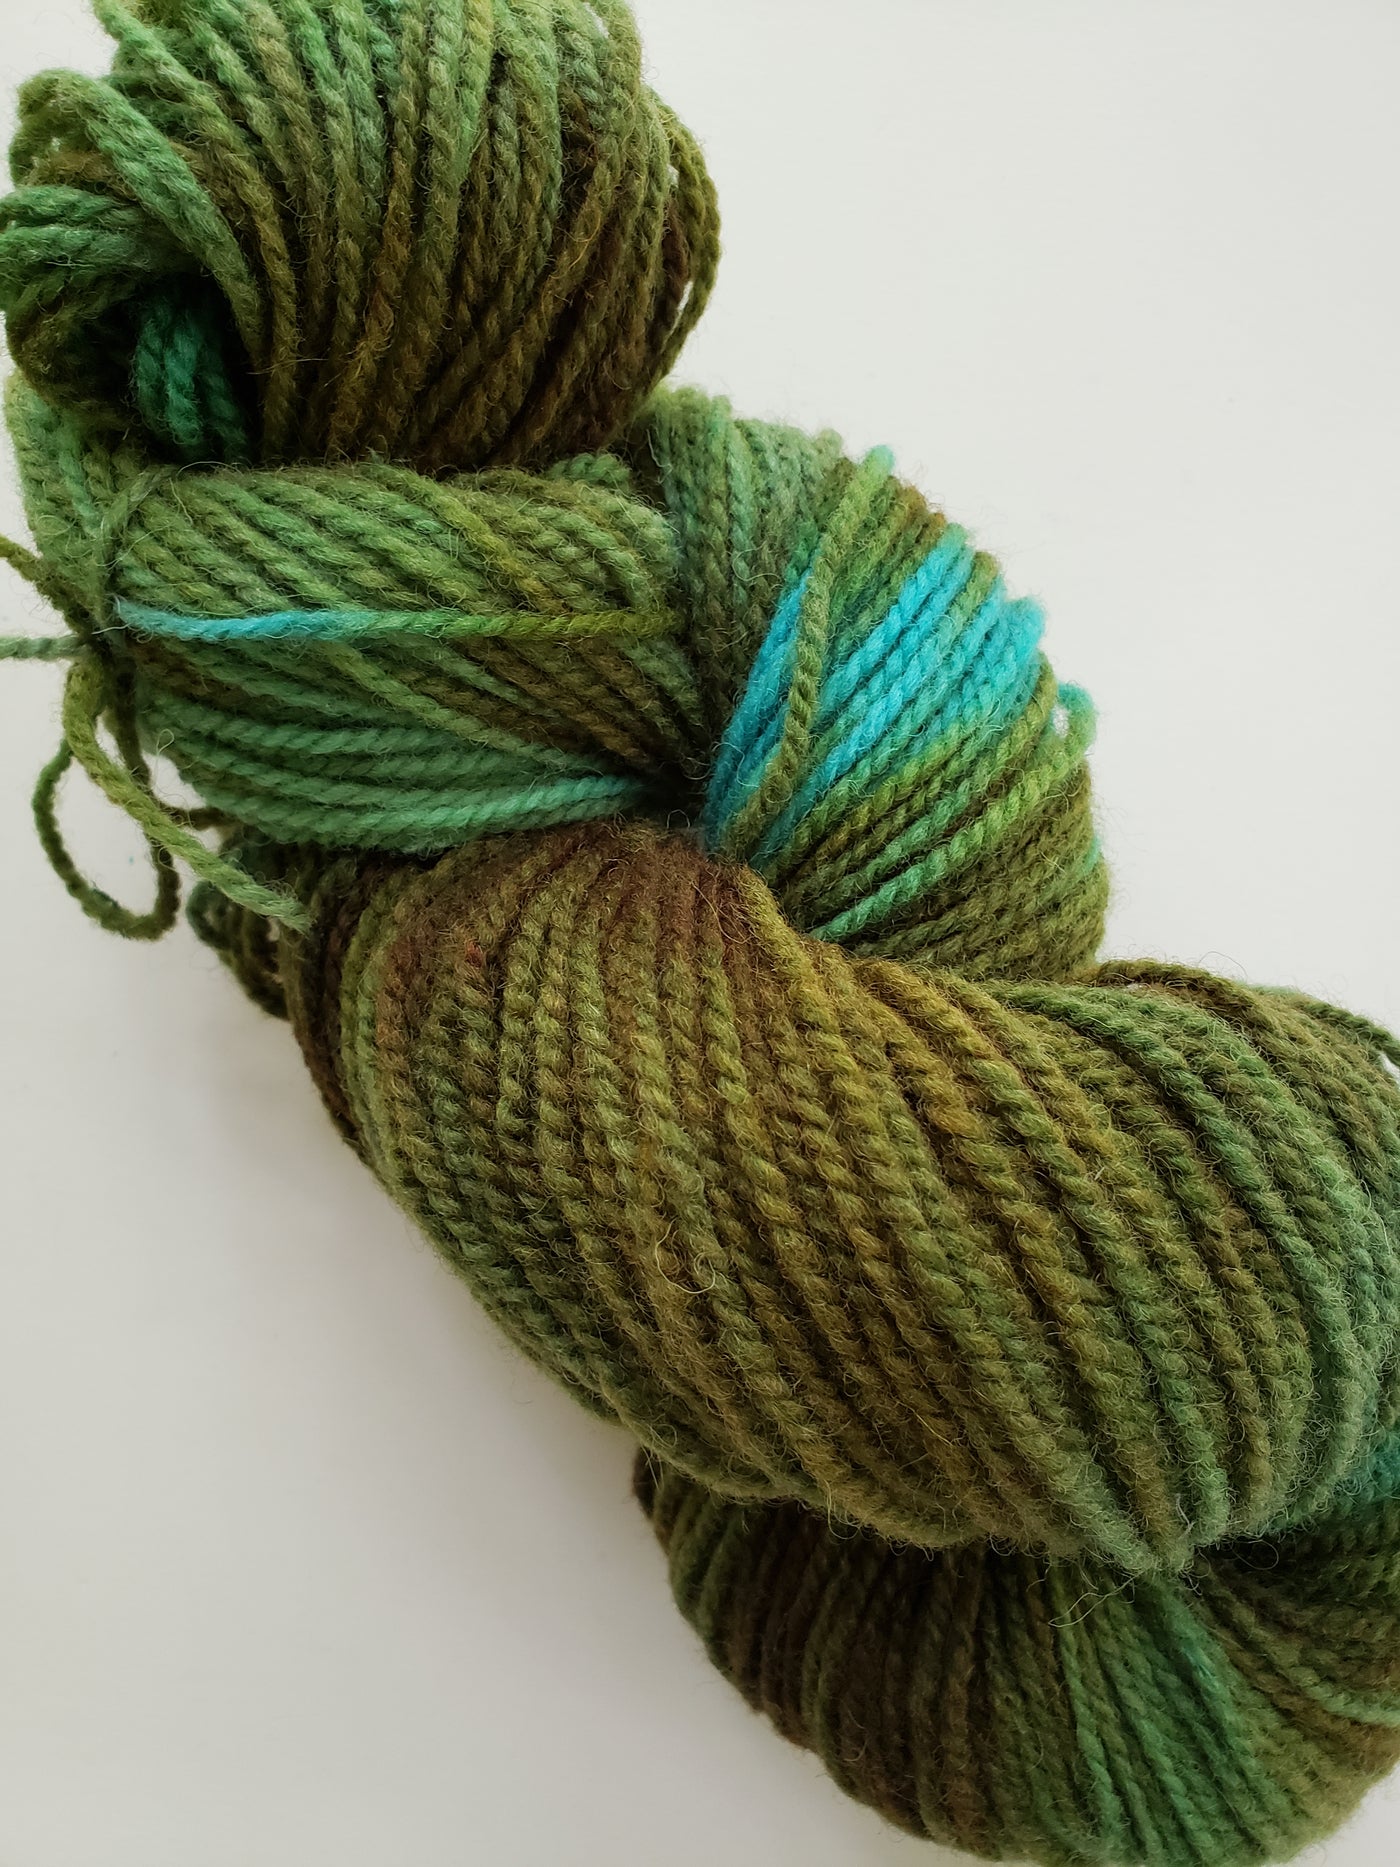 TEA LEAVES - Hand Dyed Shades of Blue-Green Worsted Yarn for Rug Hooki –  Red Sand Fibre Art Studio